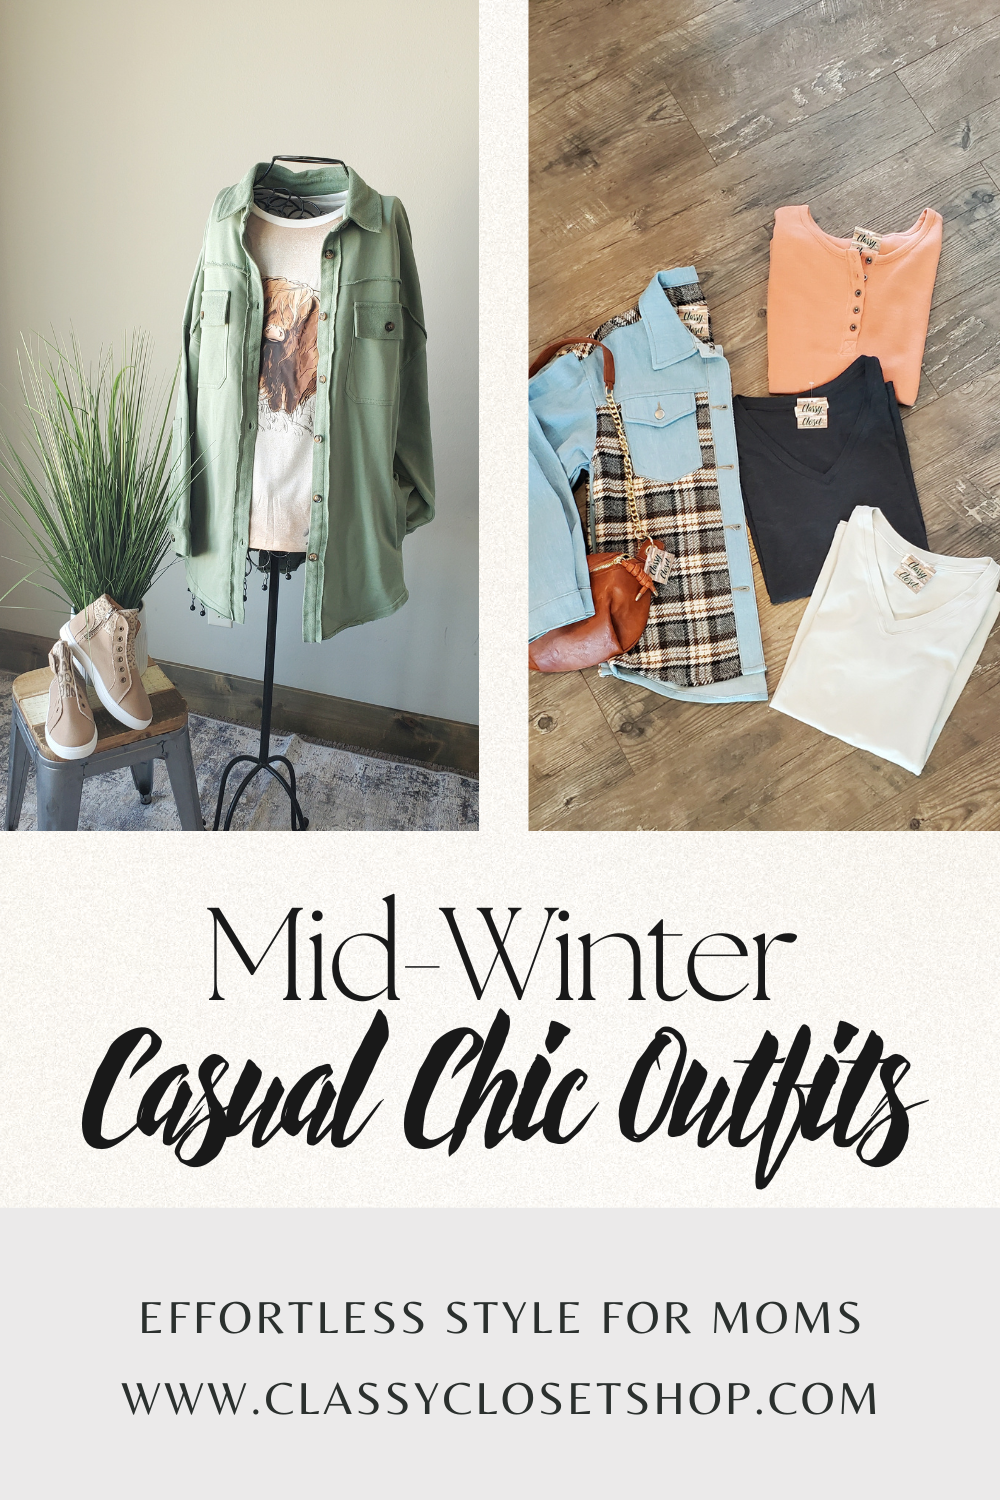 Mid Winter Casual Chic Outfits